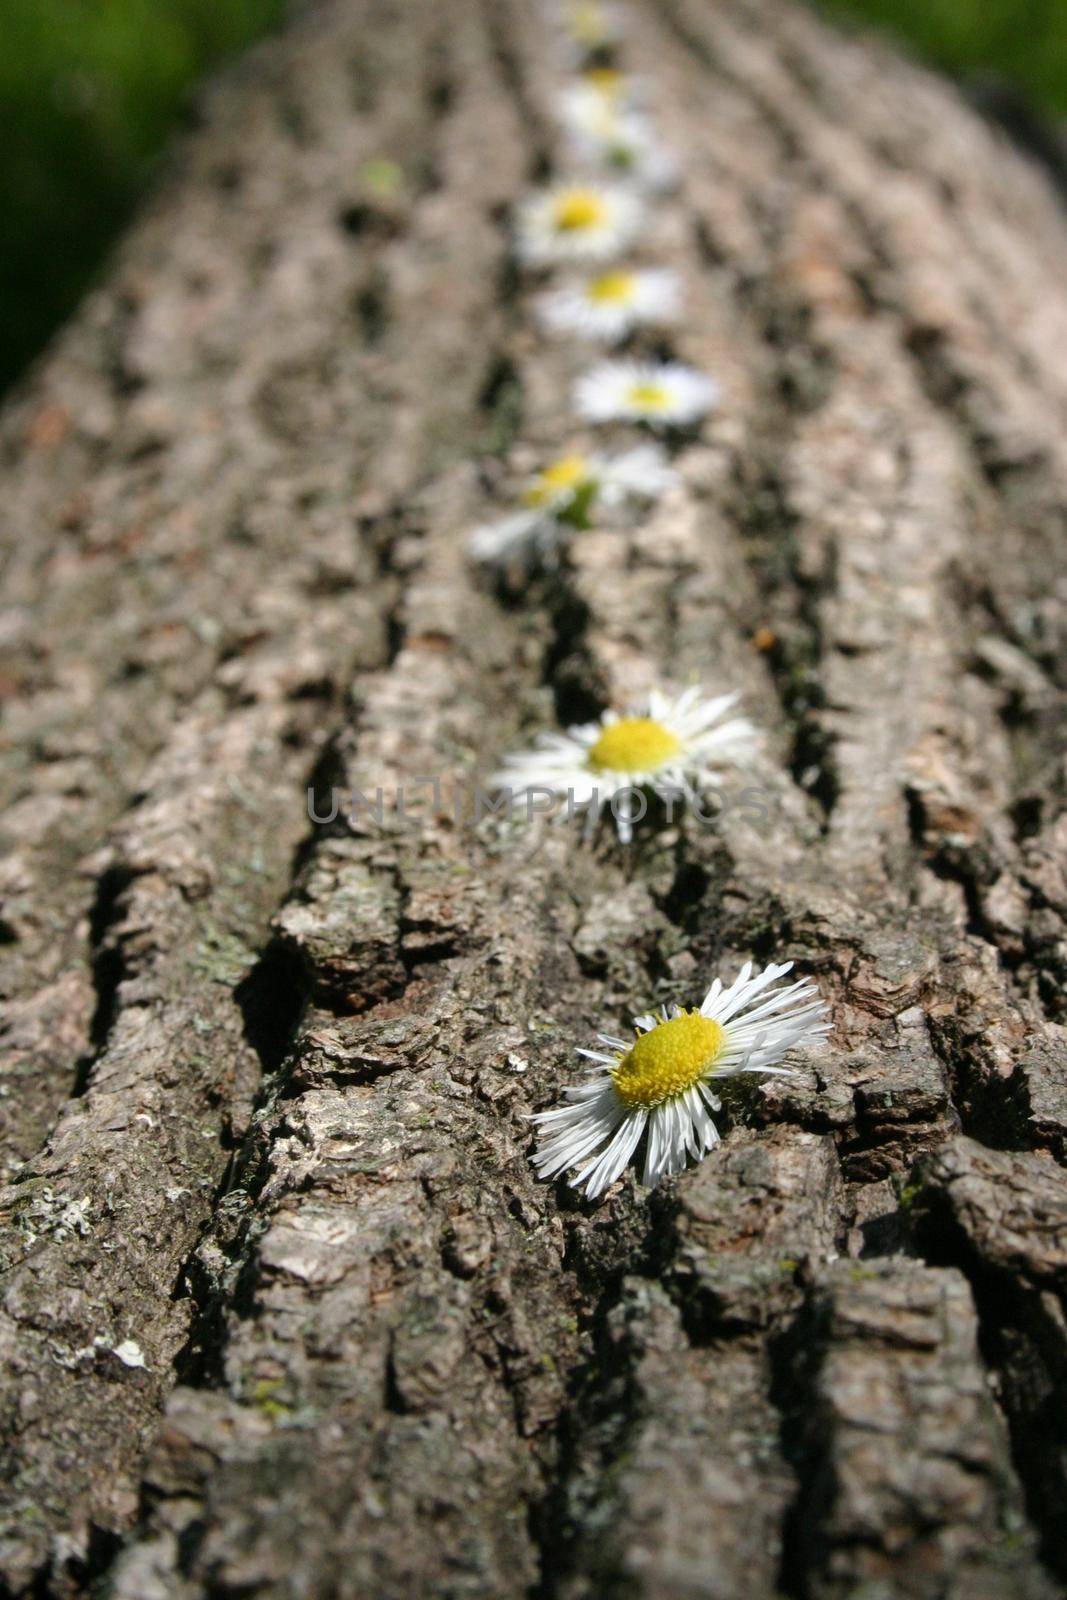 Image of Small yellow and white daisy flowers line the bark of an old tree or log